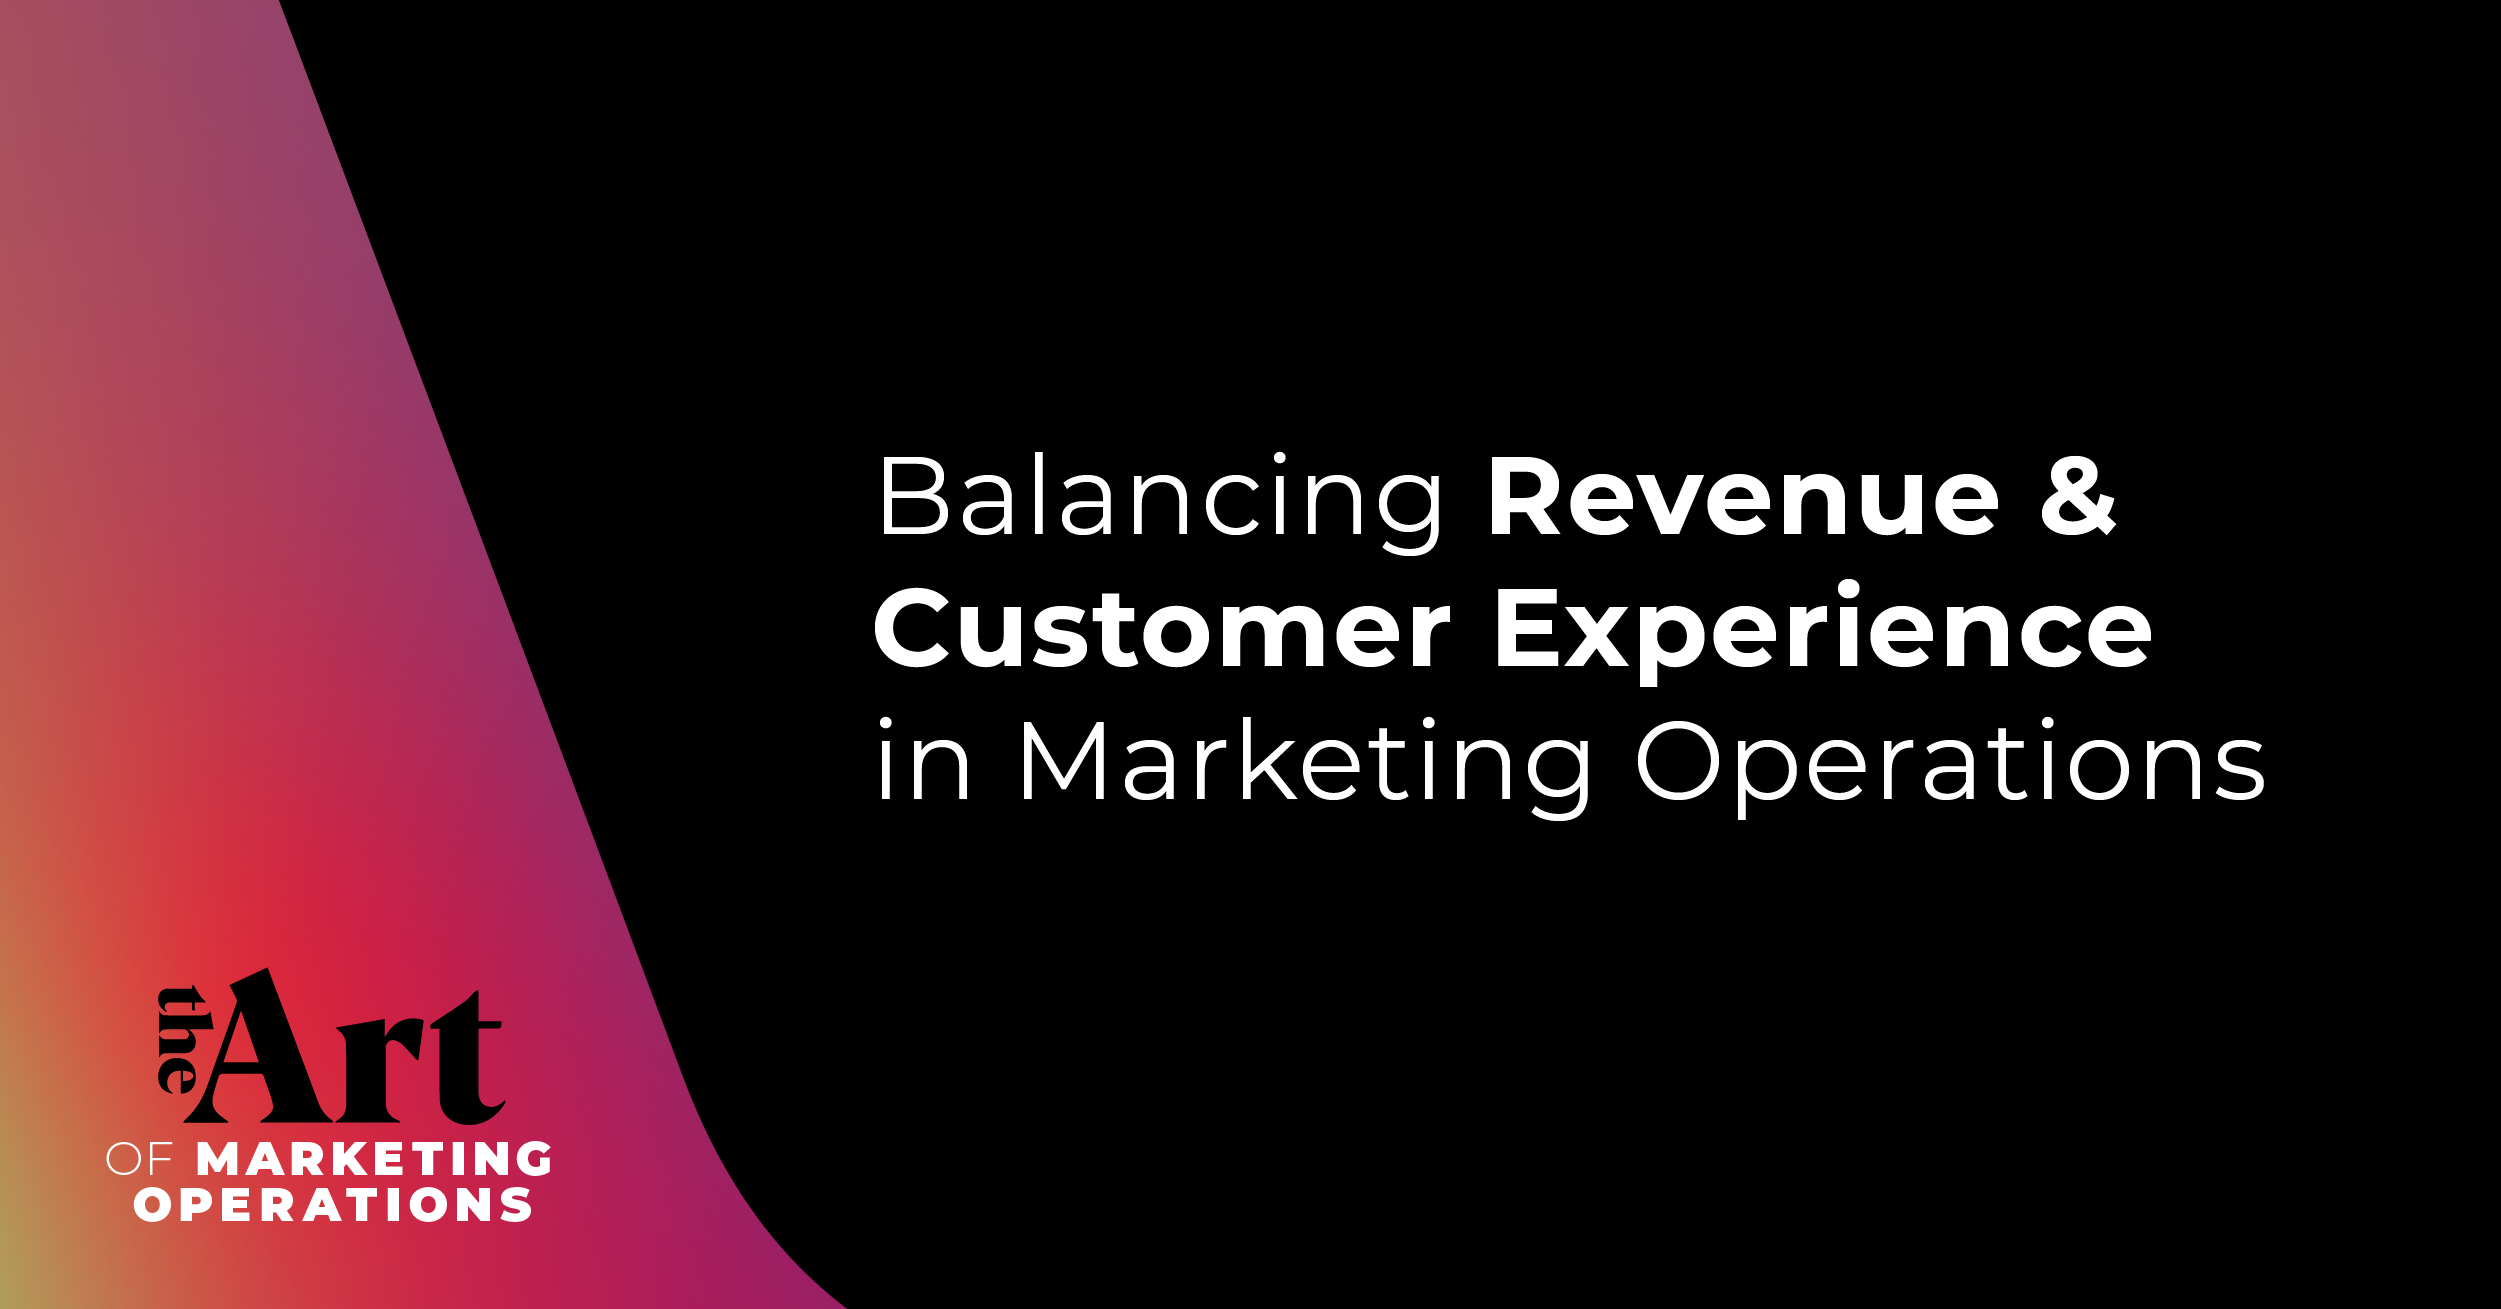 Balancing Revenue & Customer Experience in Marketing Operations